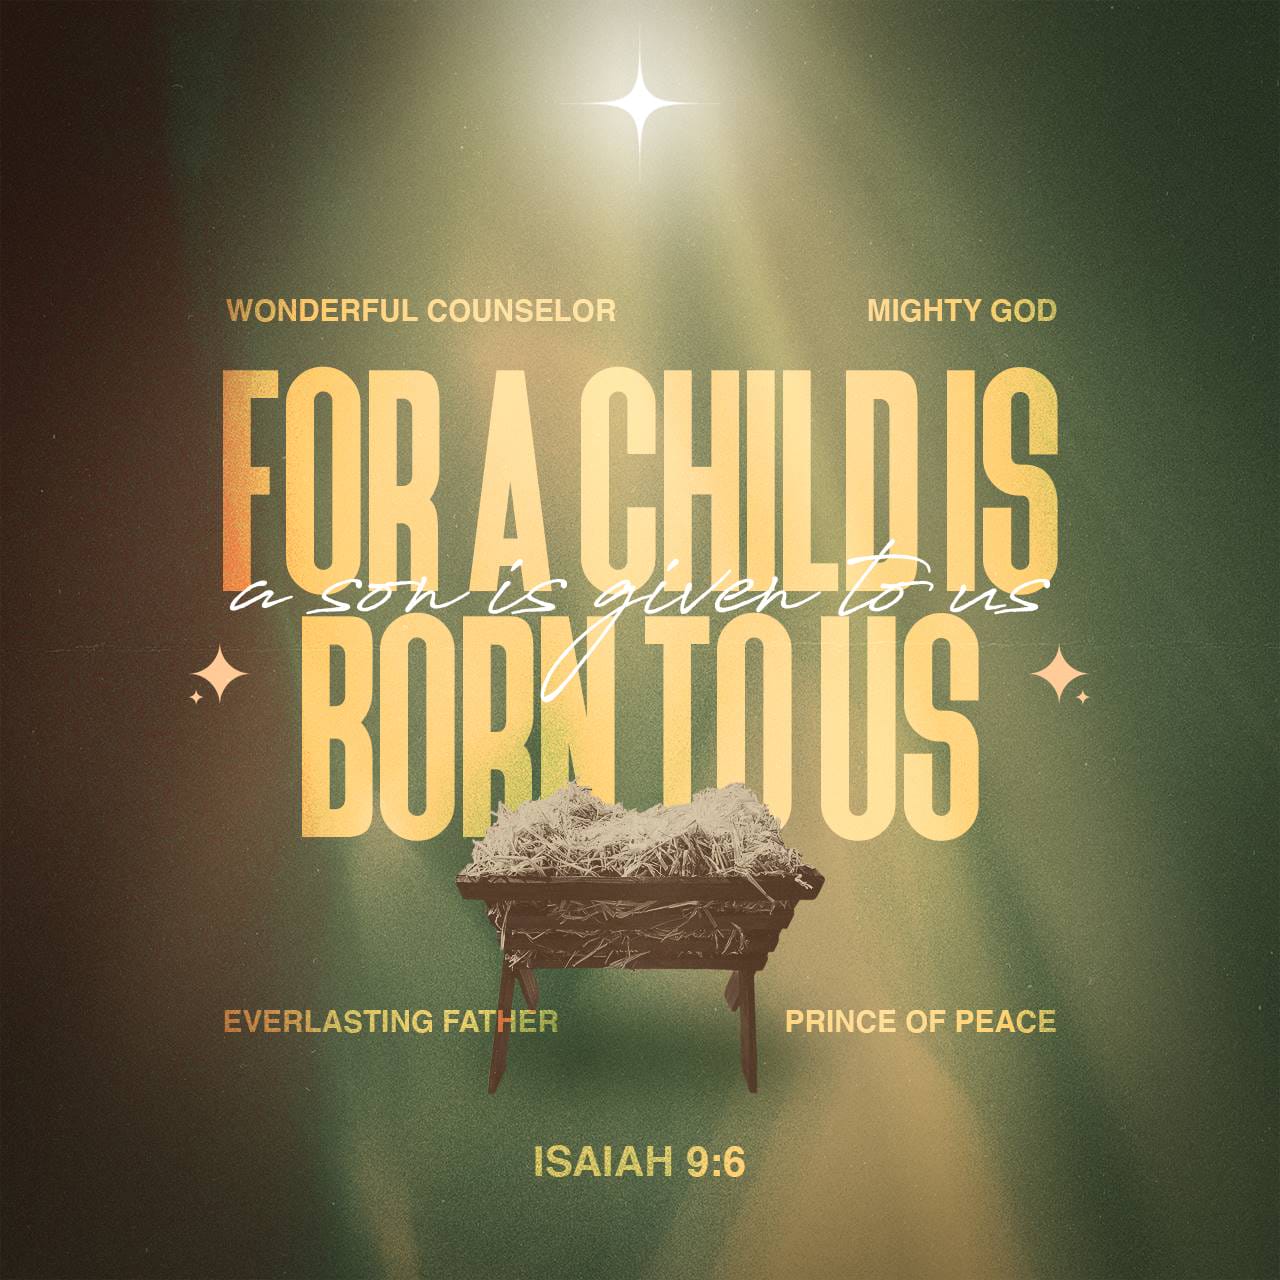 Isaiah 9:6 For unto us a child is born, unto us a son is given